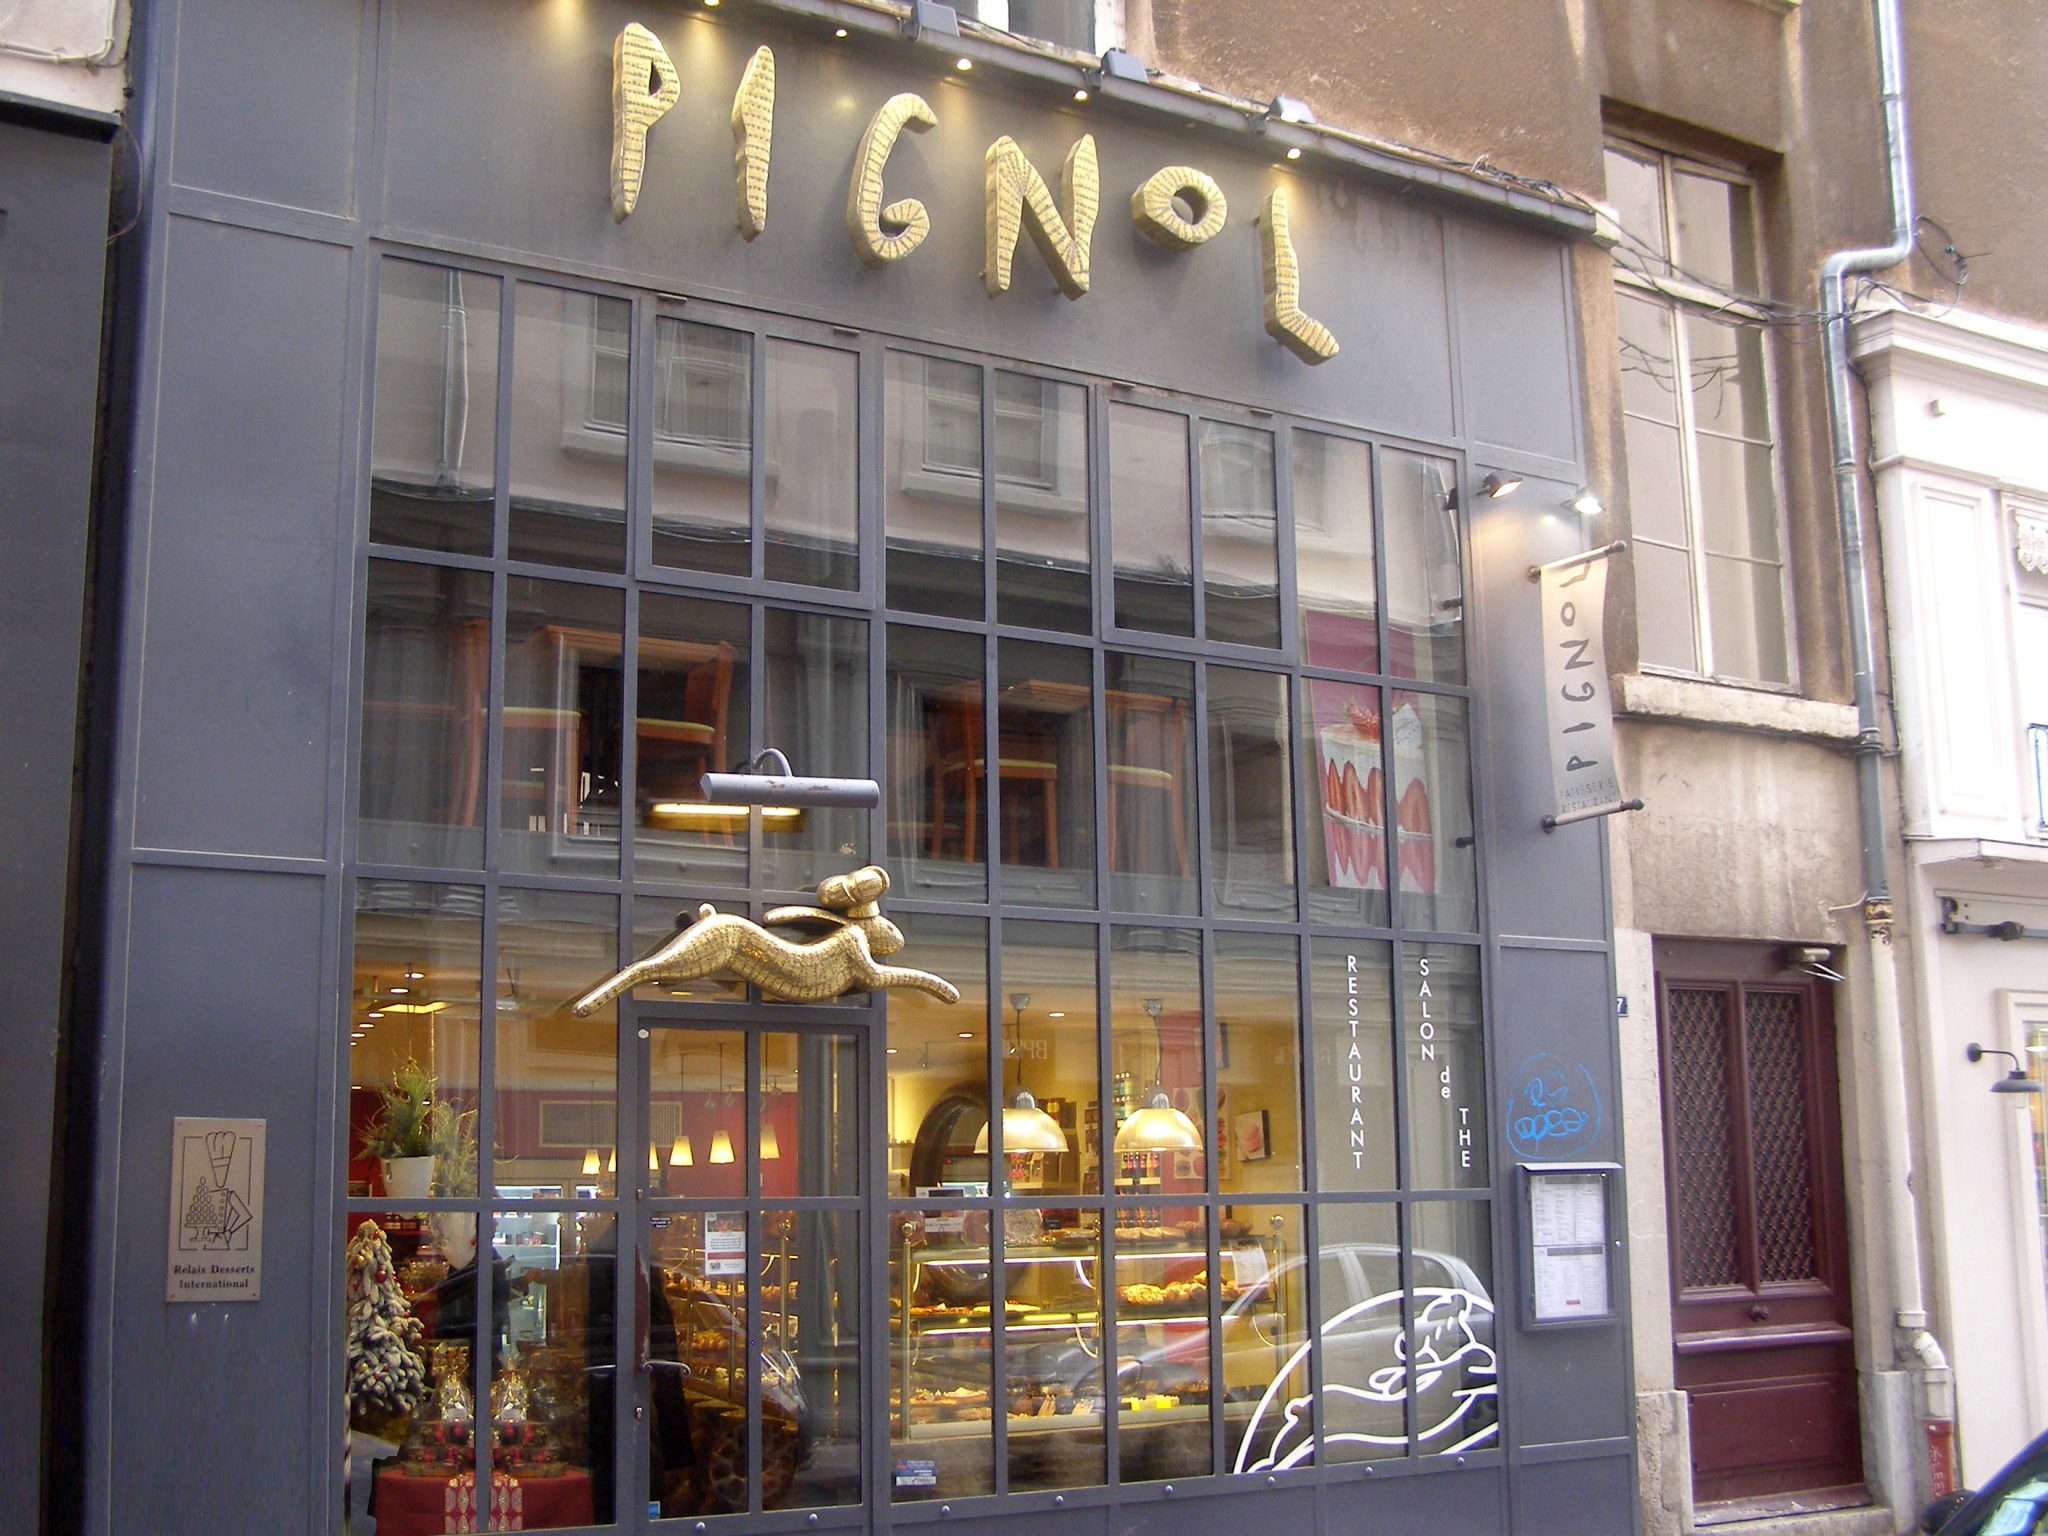 Exterior of Pignol Patisserie in Leon, France - home of France's best croissant